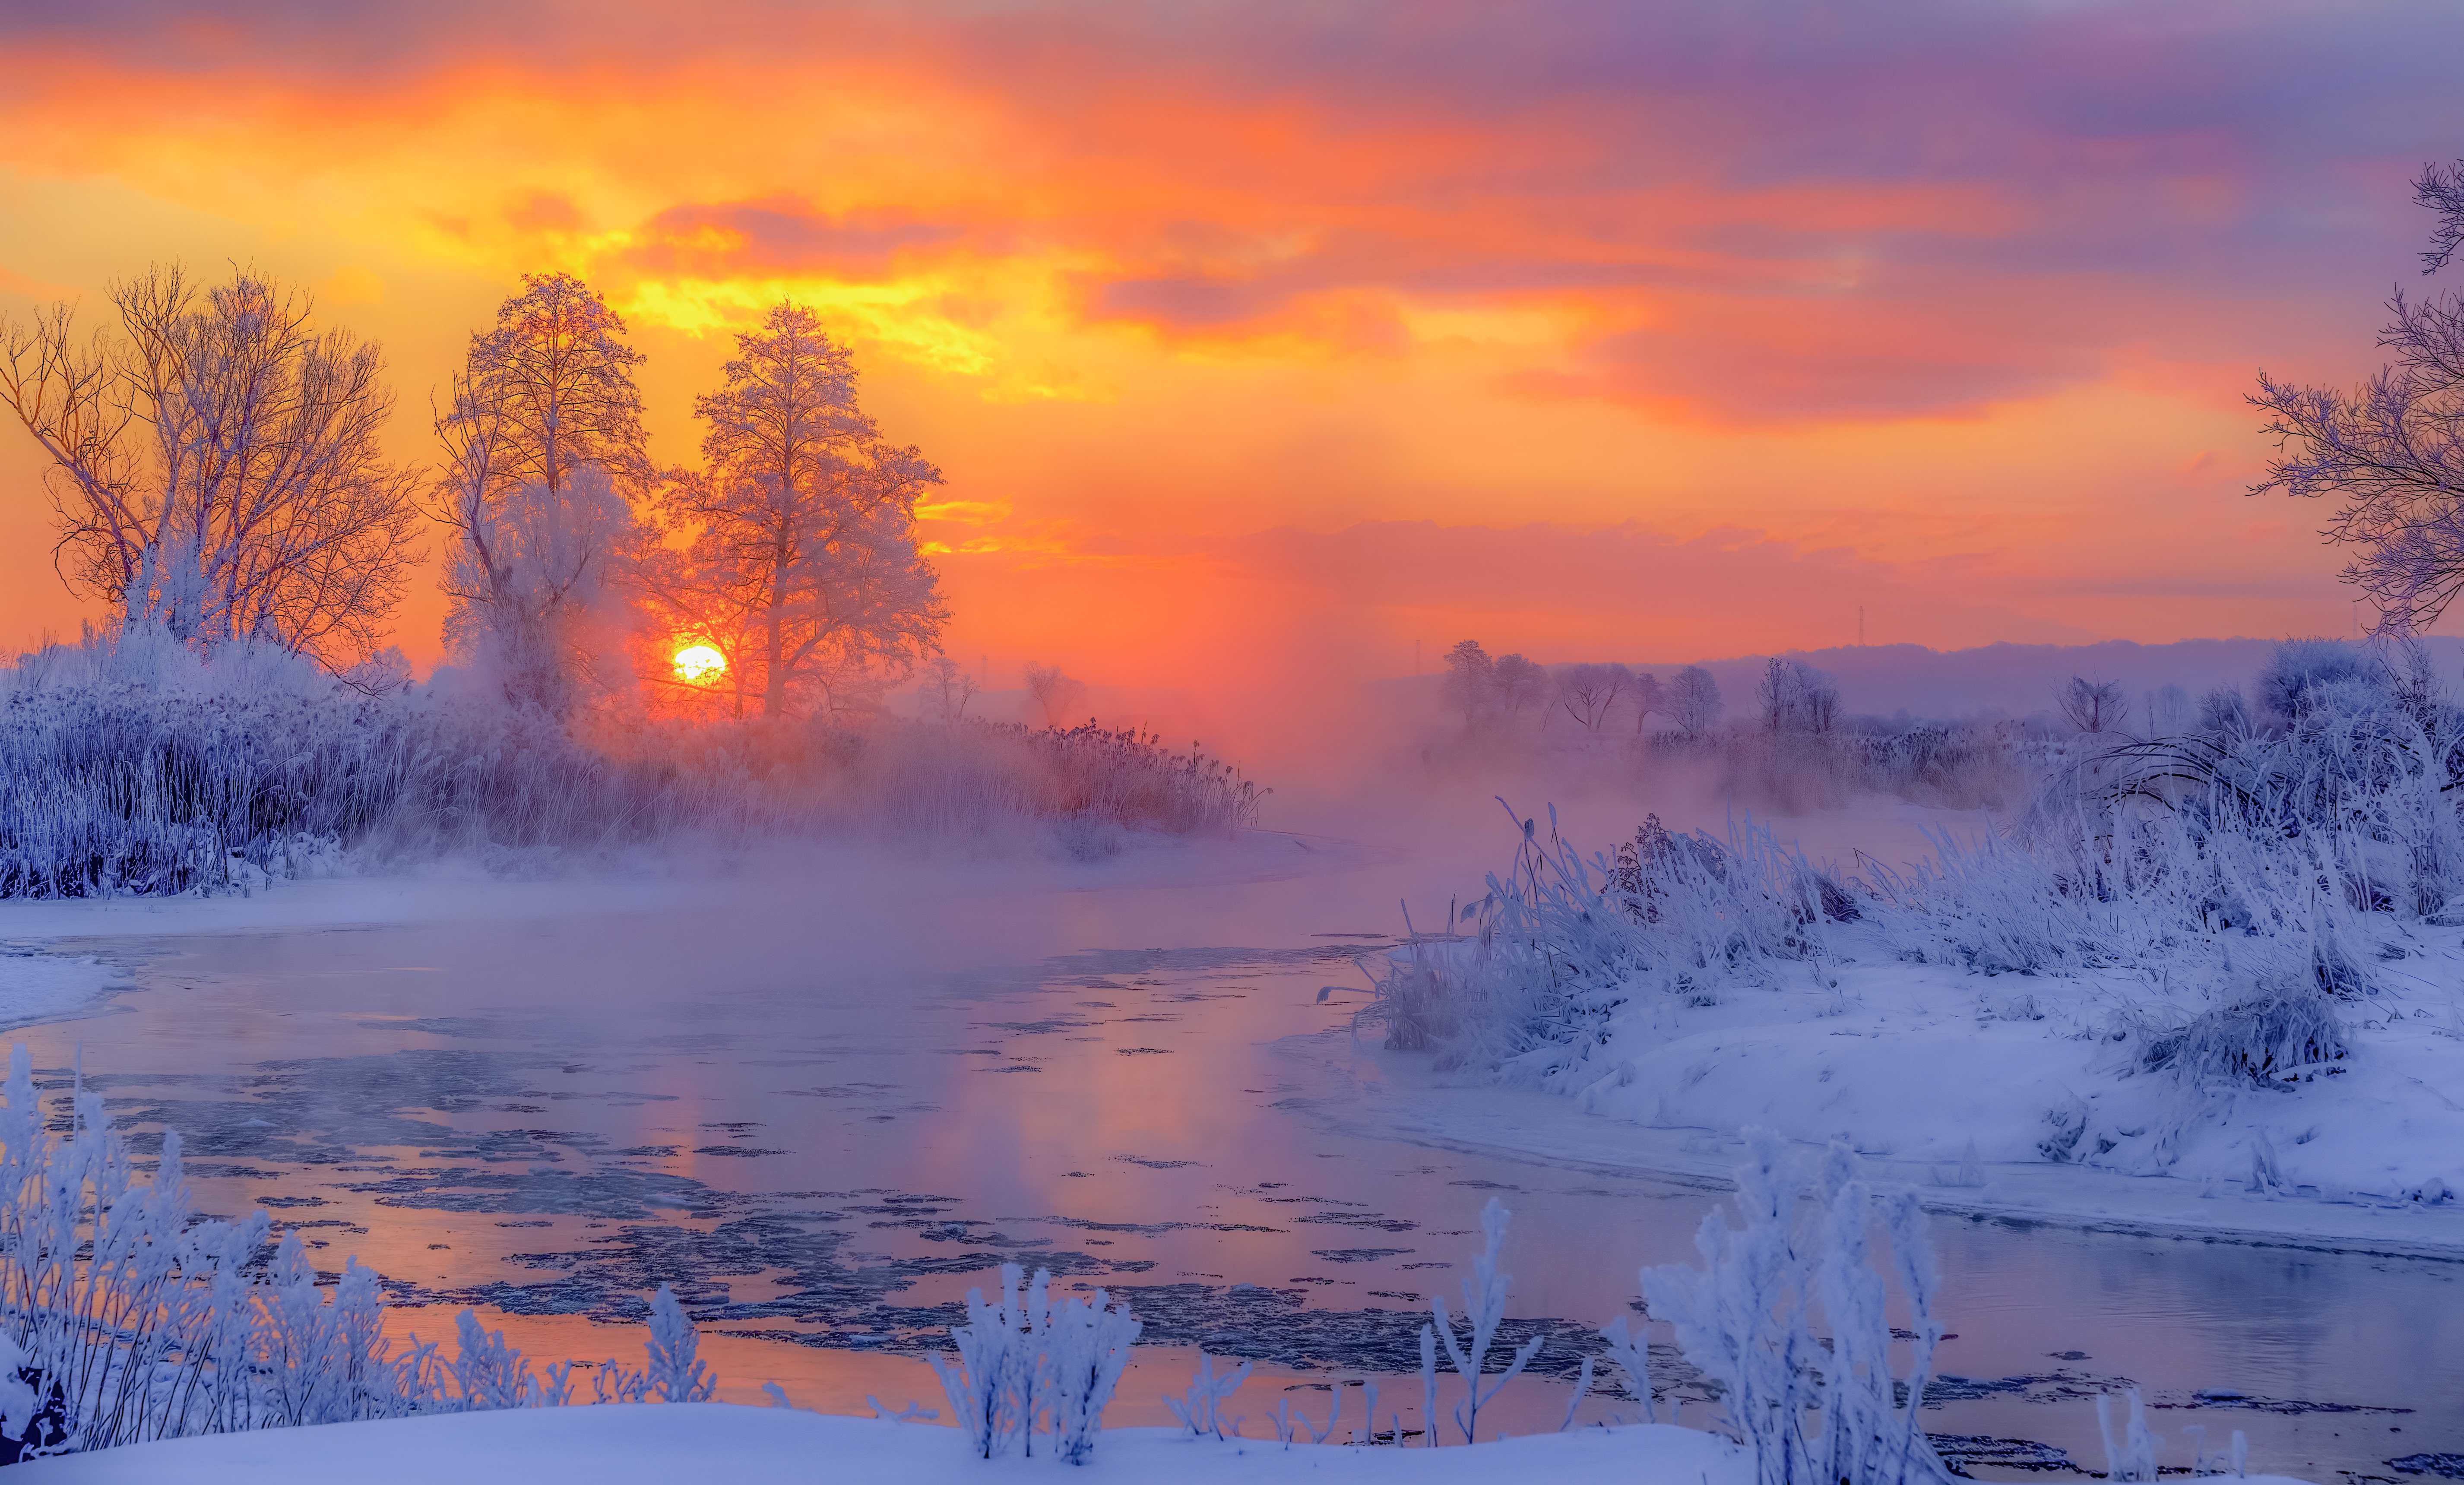 Frosty Winter Sunrise over the Gwda River © Krzysztof Tollas